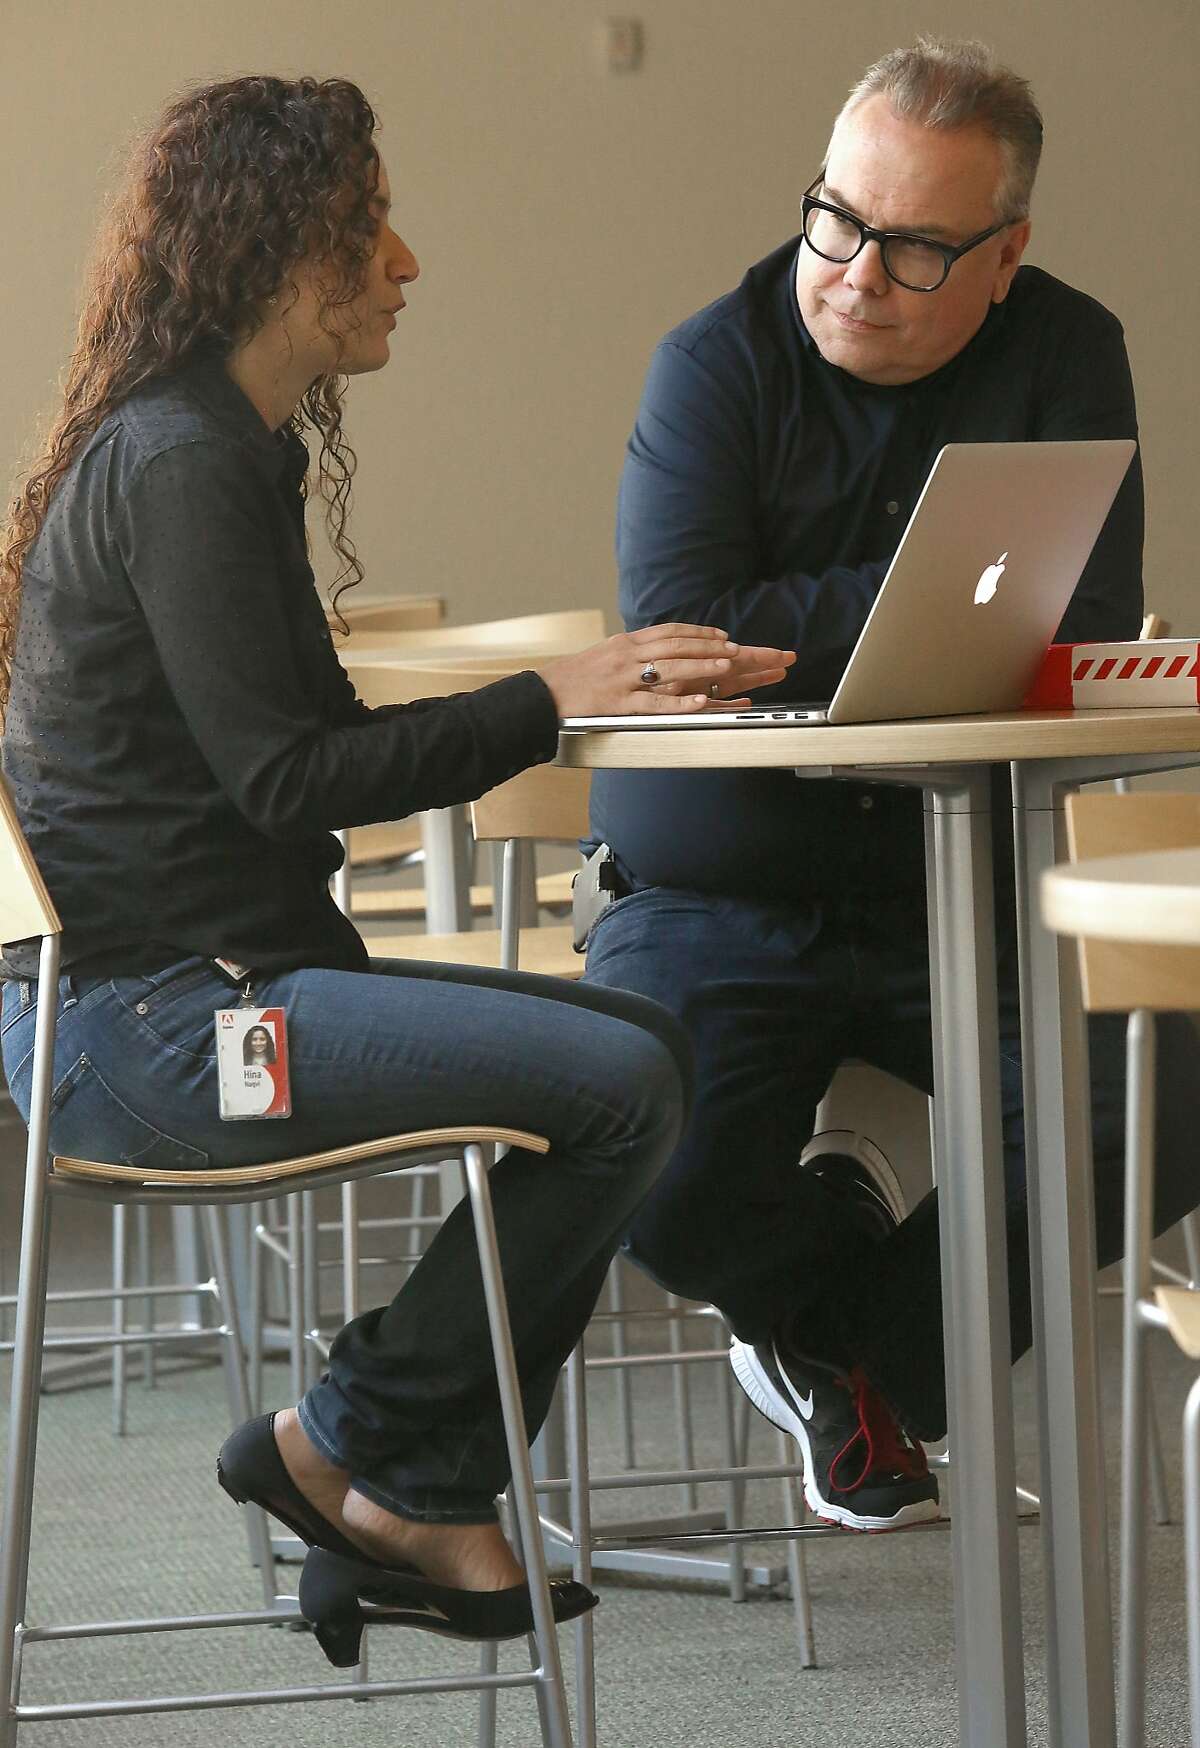 Adobe vice president for creativity Mark Randall (right) talks with product manager Hina Naqvi (left) on Wednesday, June 17, 2015.